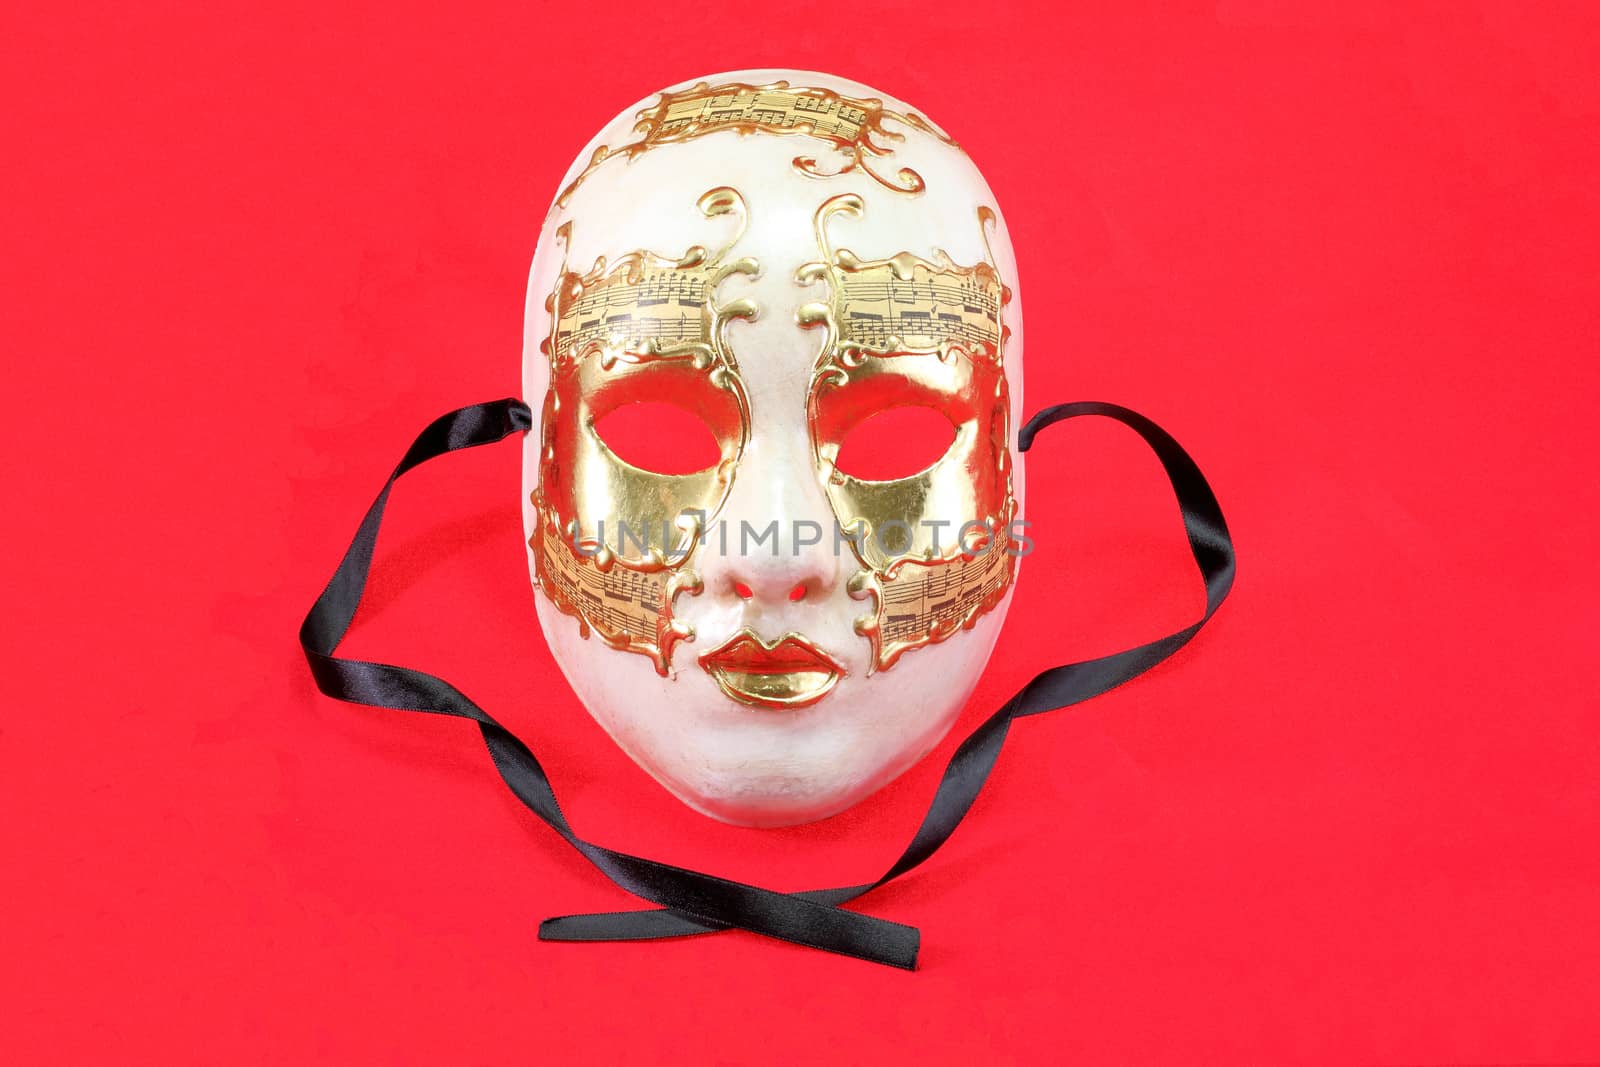 The Venetian mask on a red background